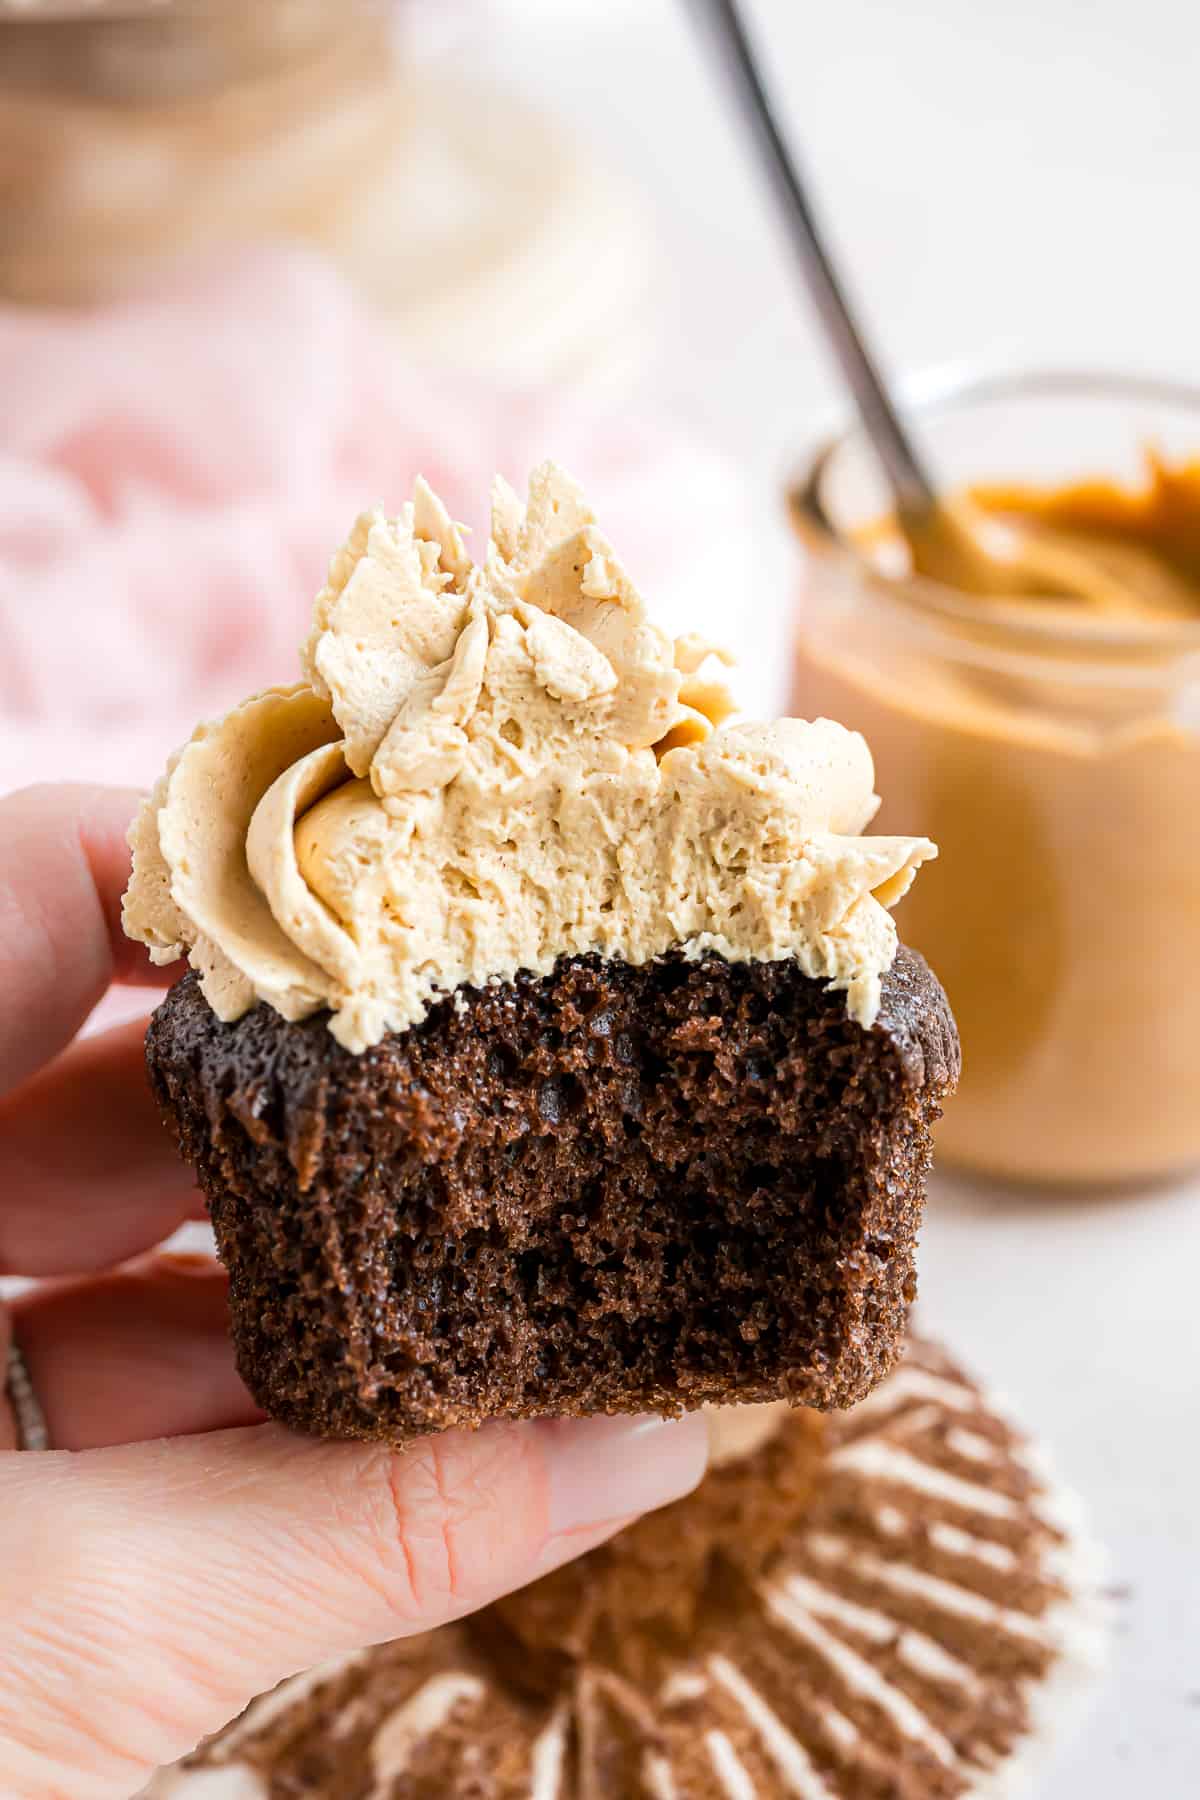 Chocolate cupcake with peanut butter frosting, large bite removed.